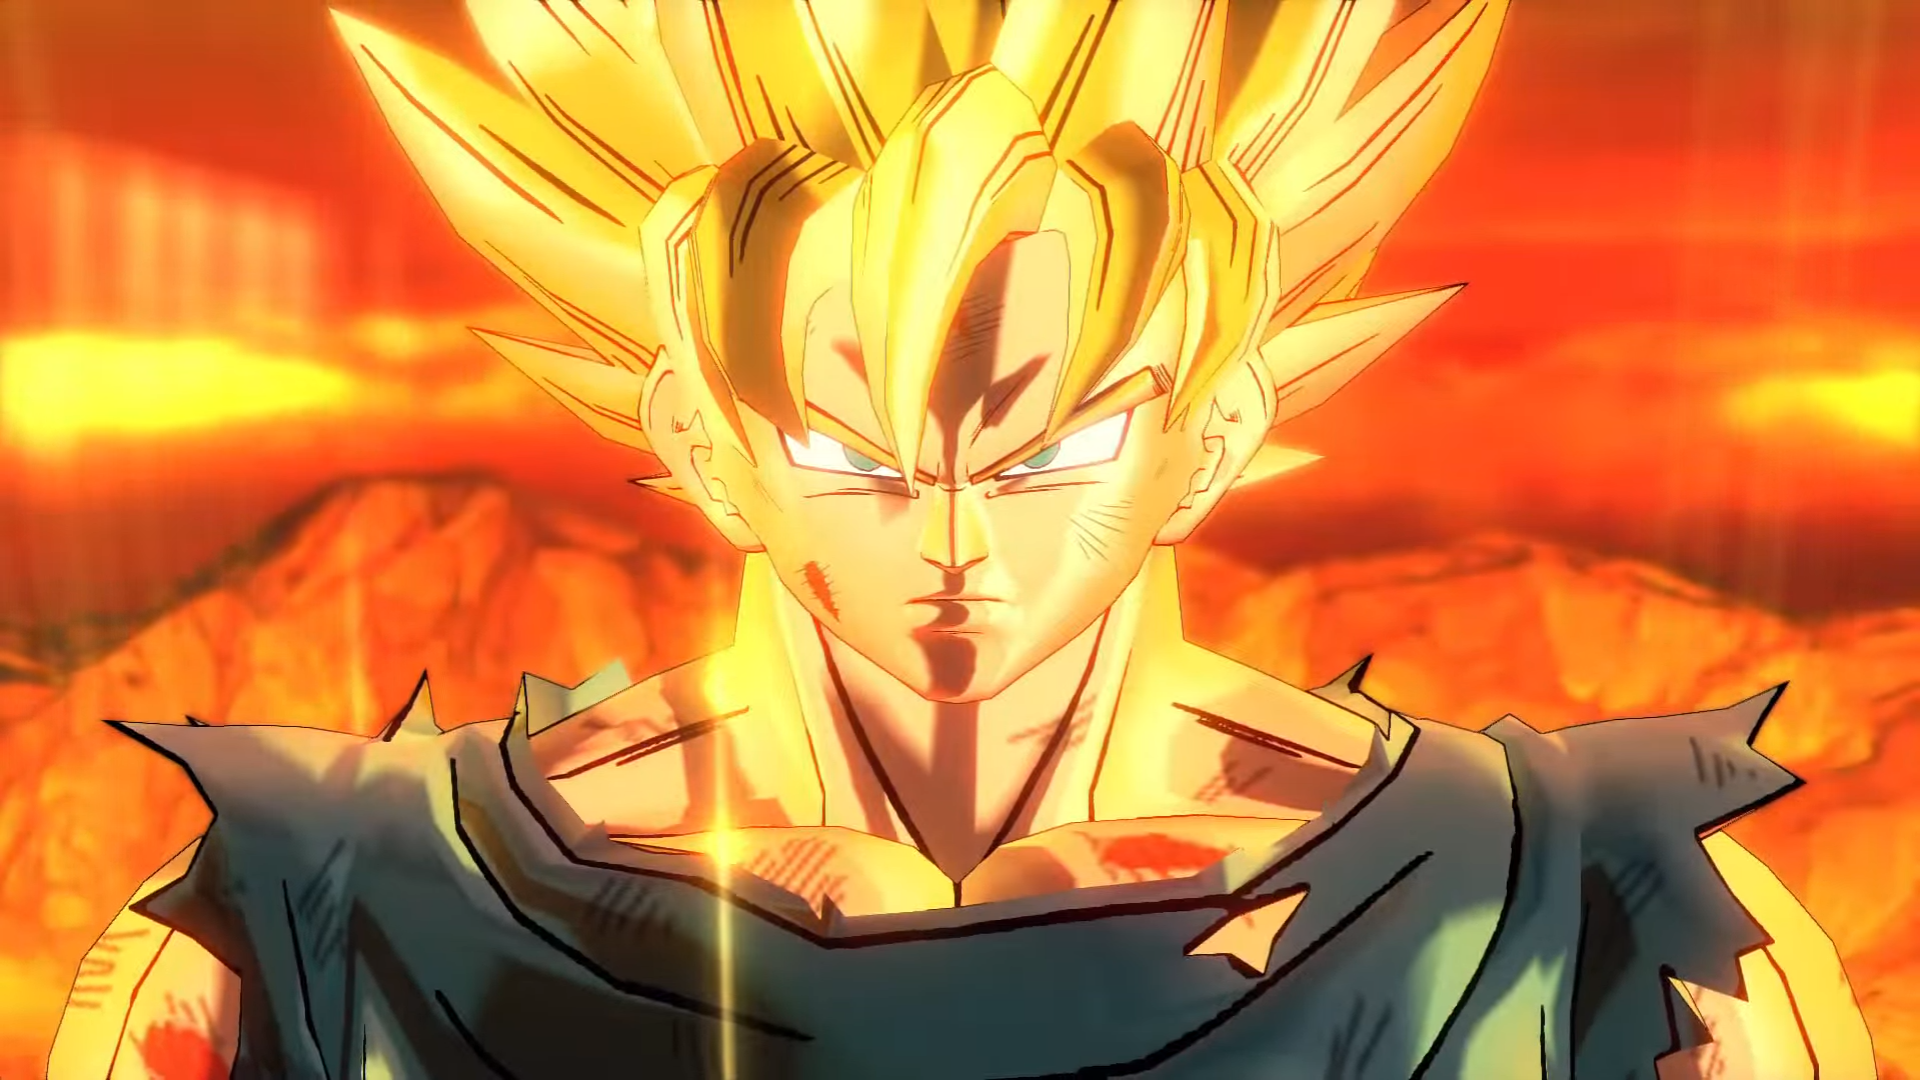 Dragonball Xenoverse 2 Is Fun But Complex If You Don T Know The Series Real Game Media